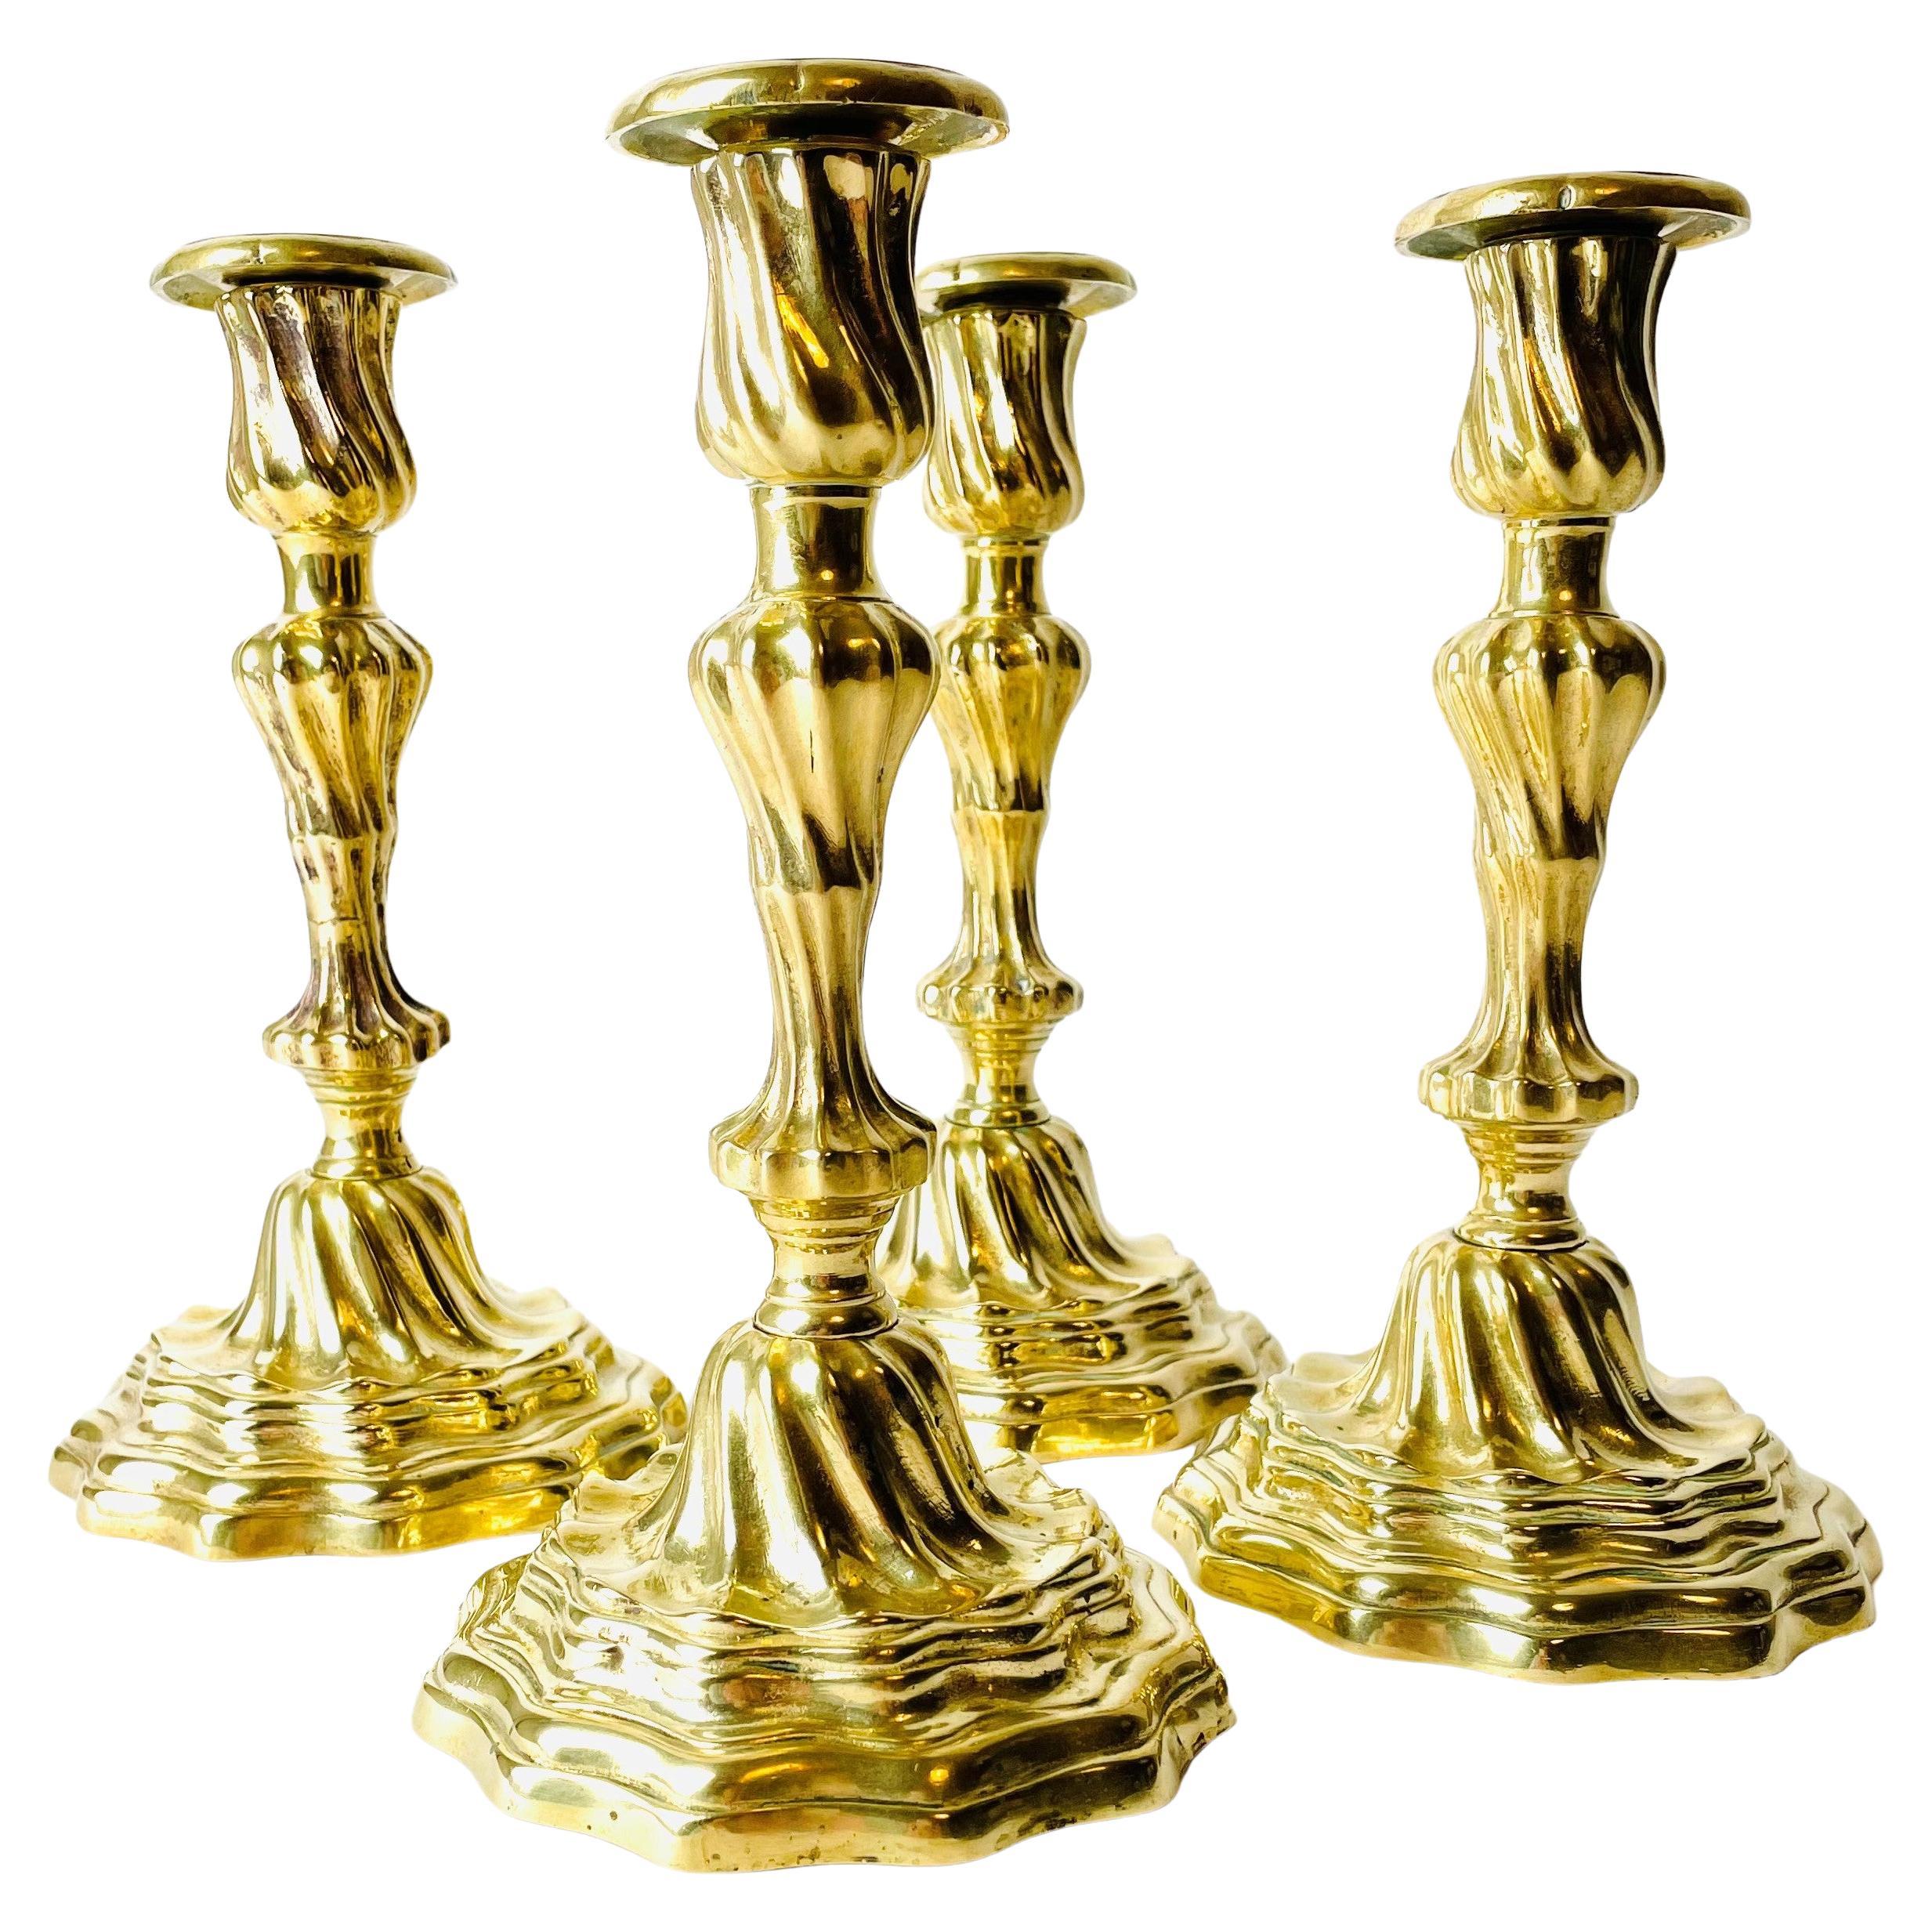 Four Beautiful Louis XV-Candlesticks in Gilded Bronze from Banque De France